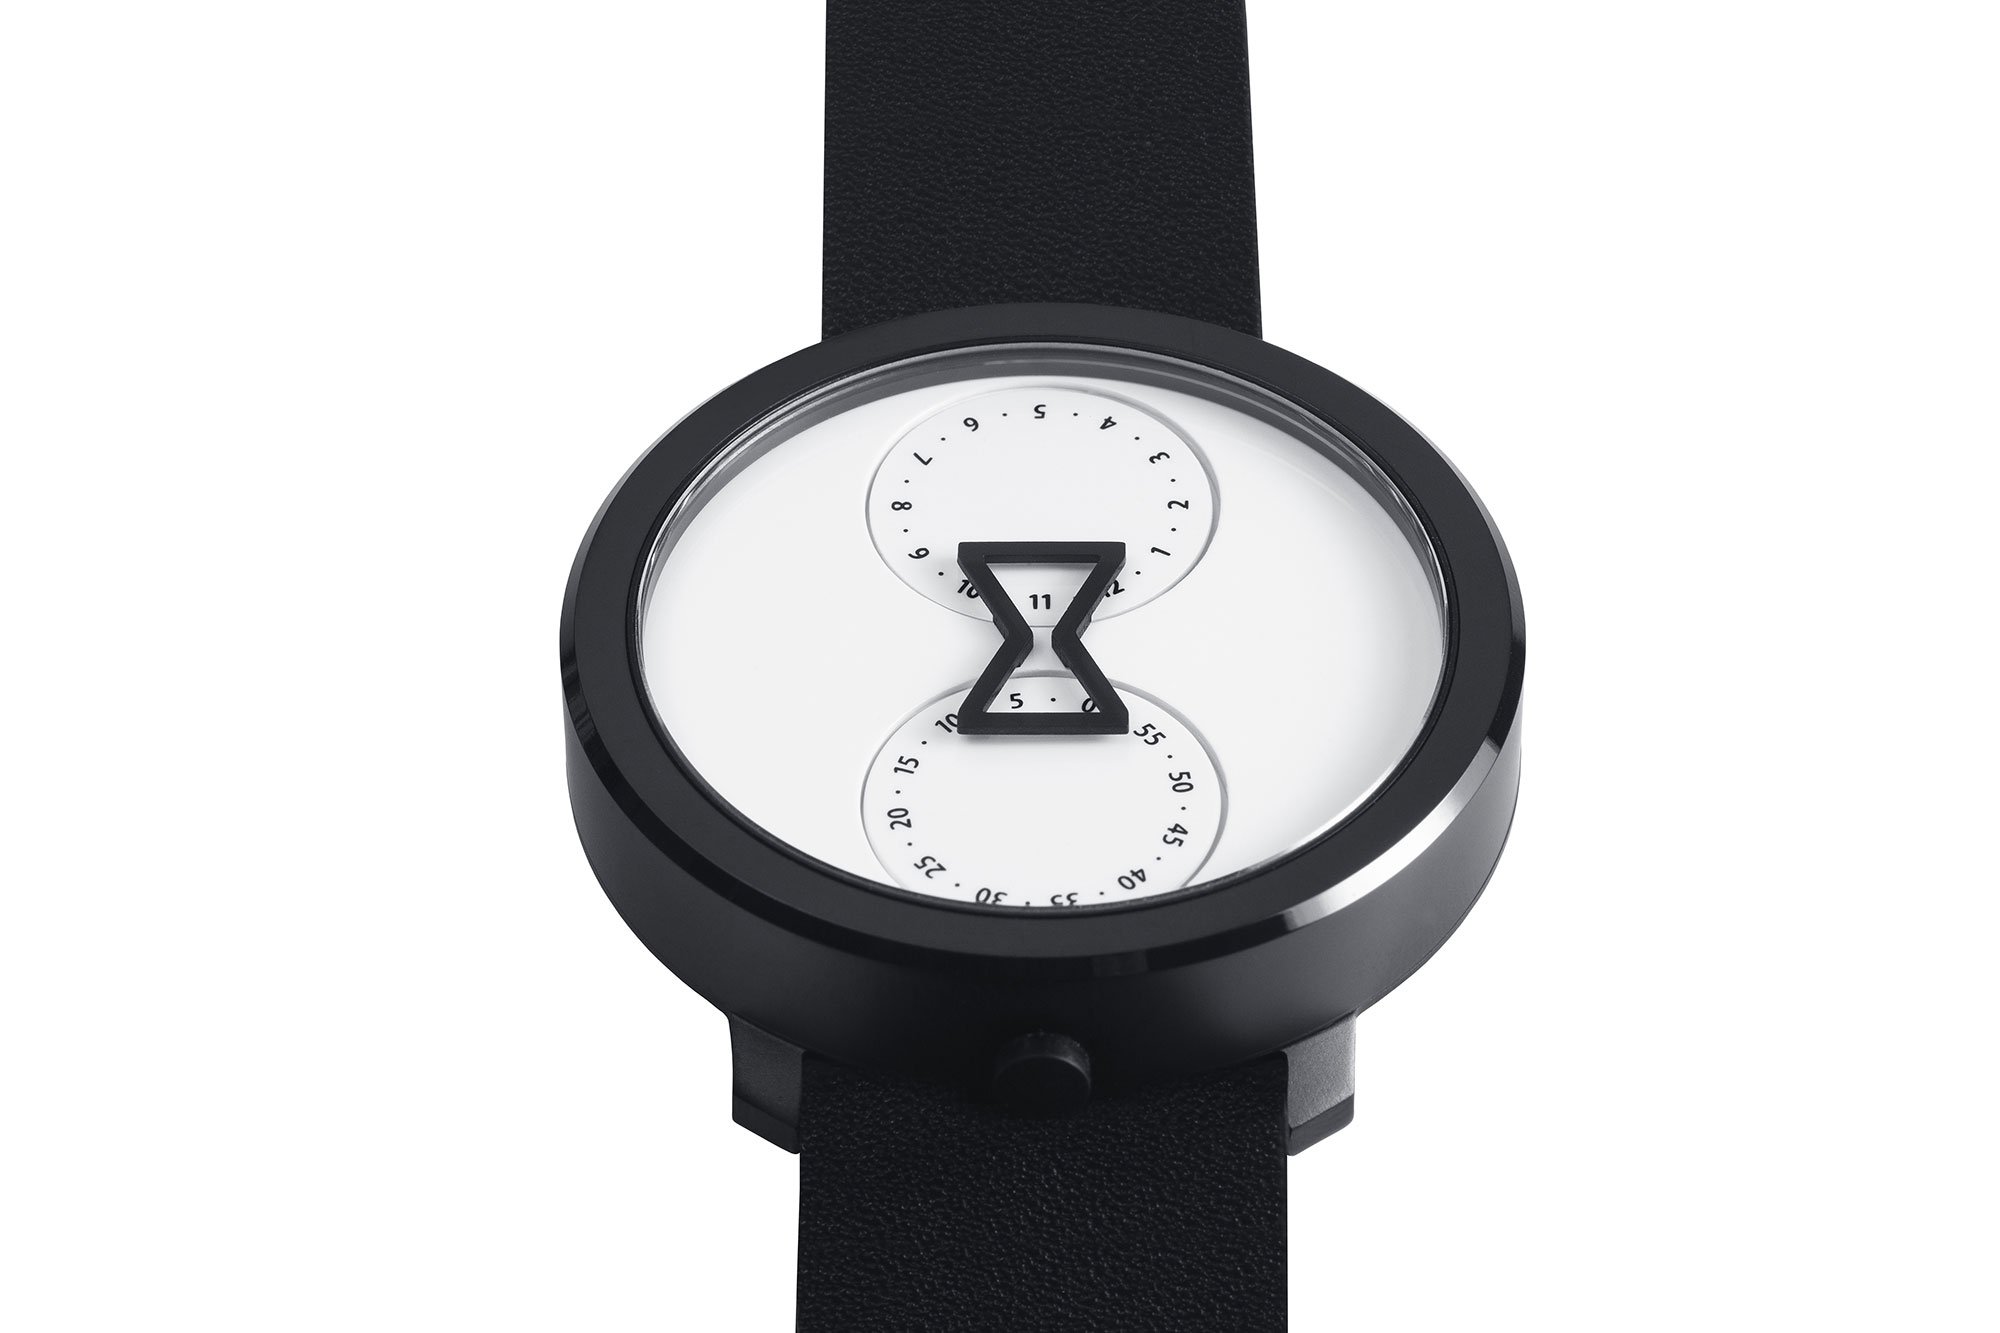 The Limited-Edition NU:RO Watch - Gessato